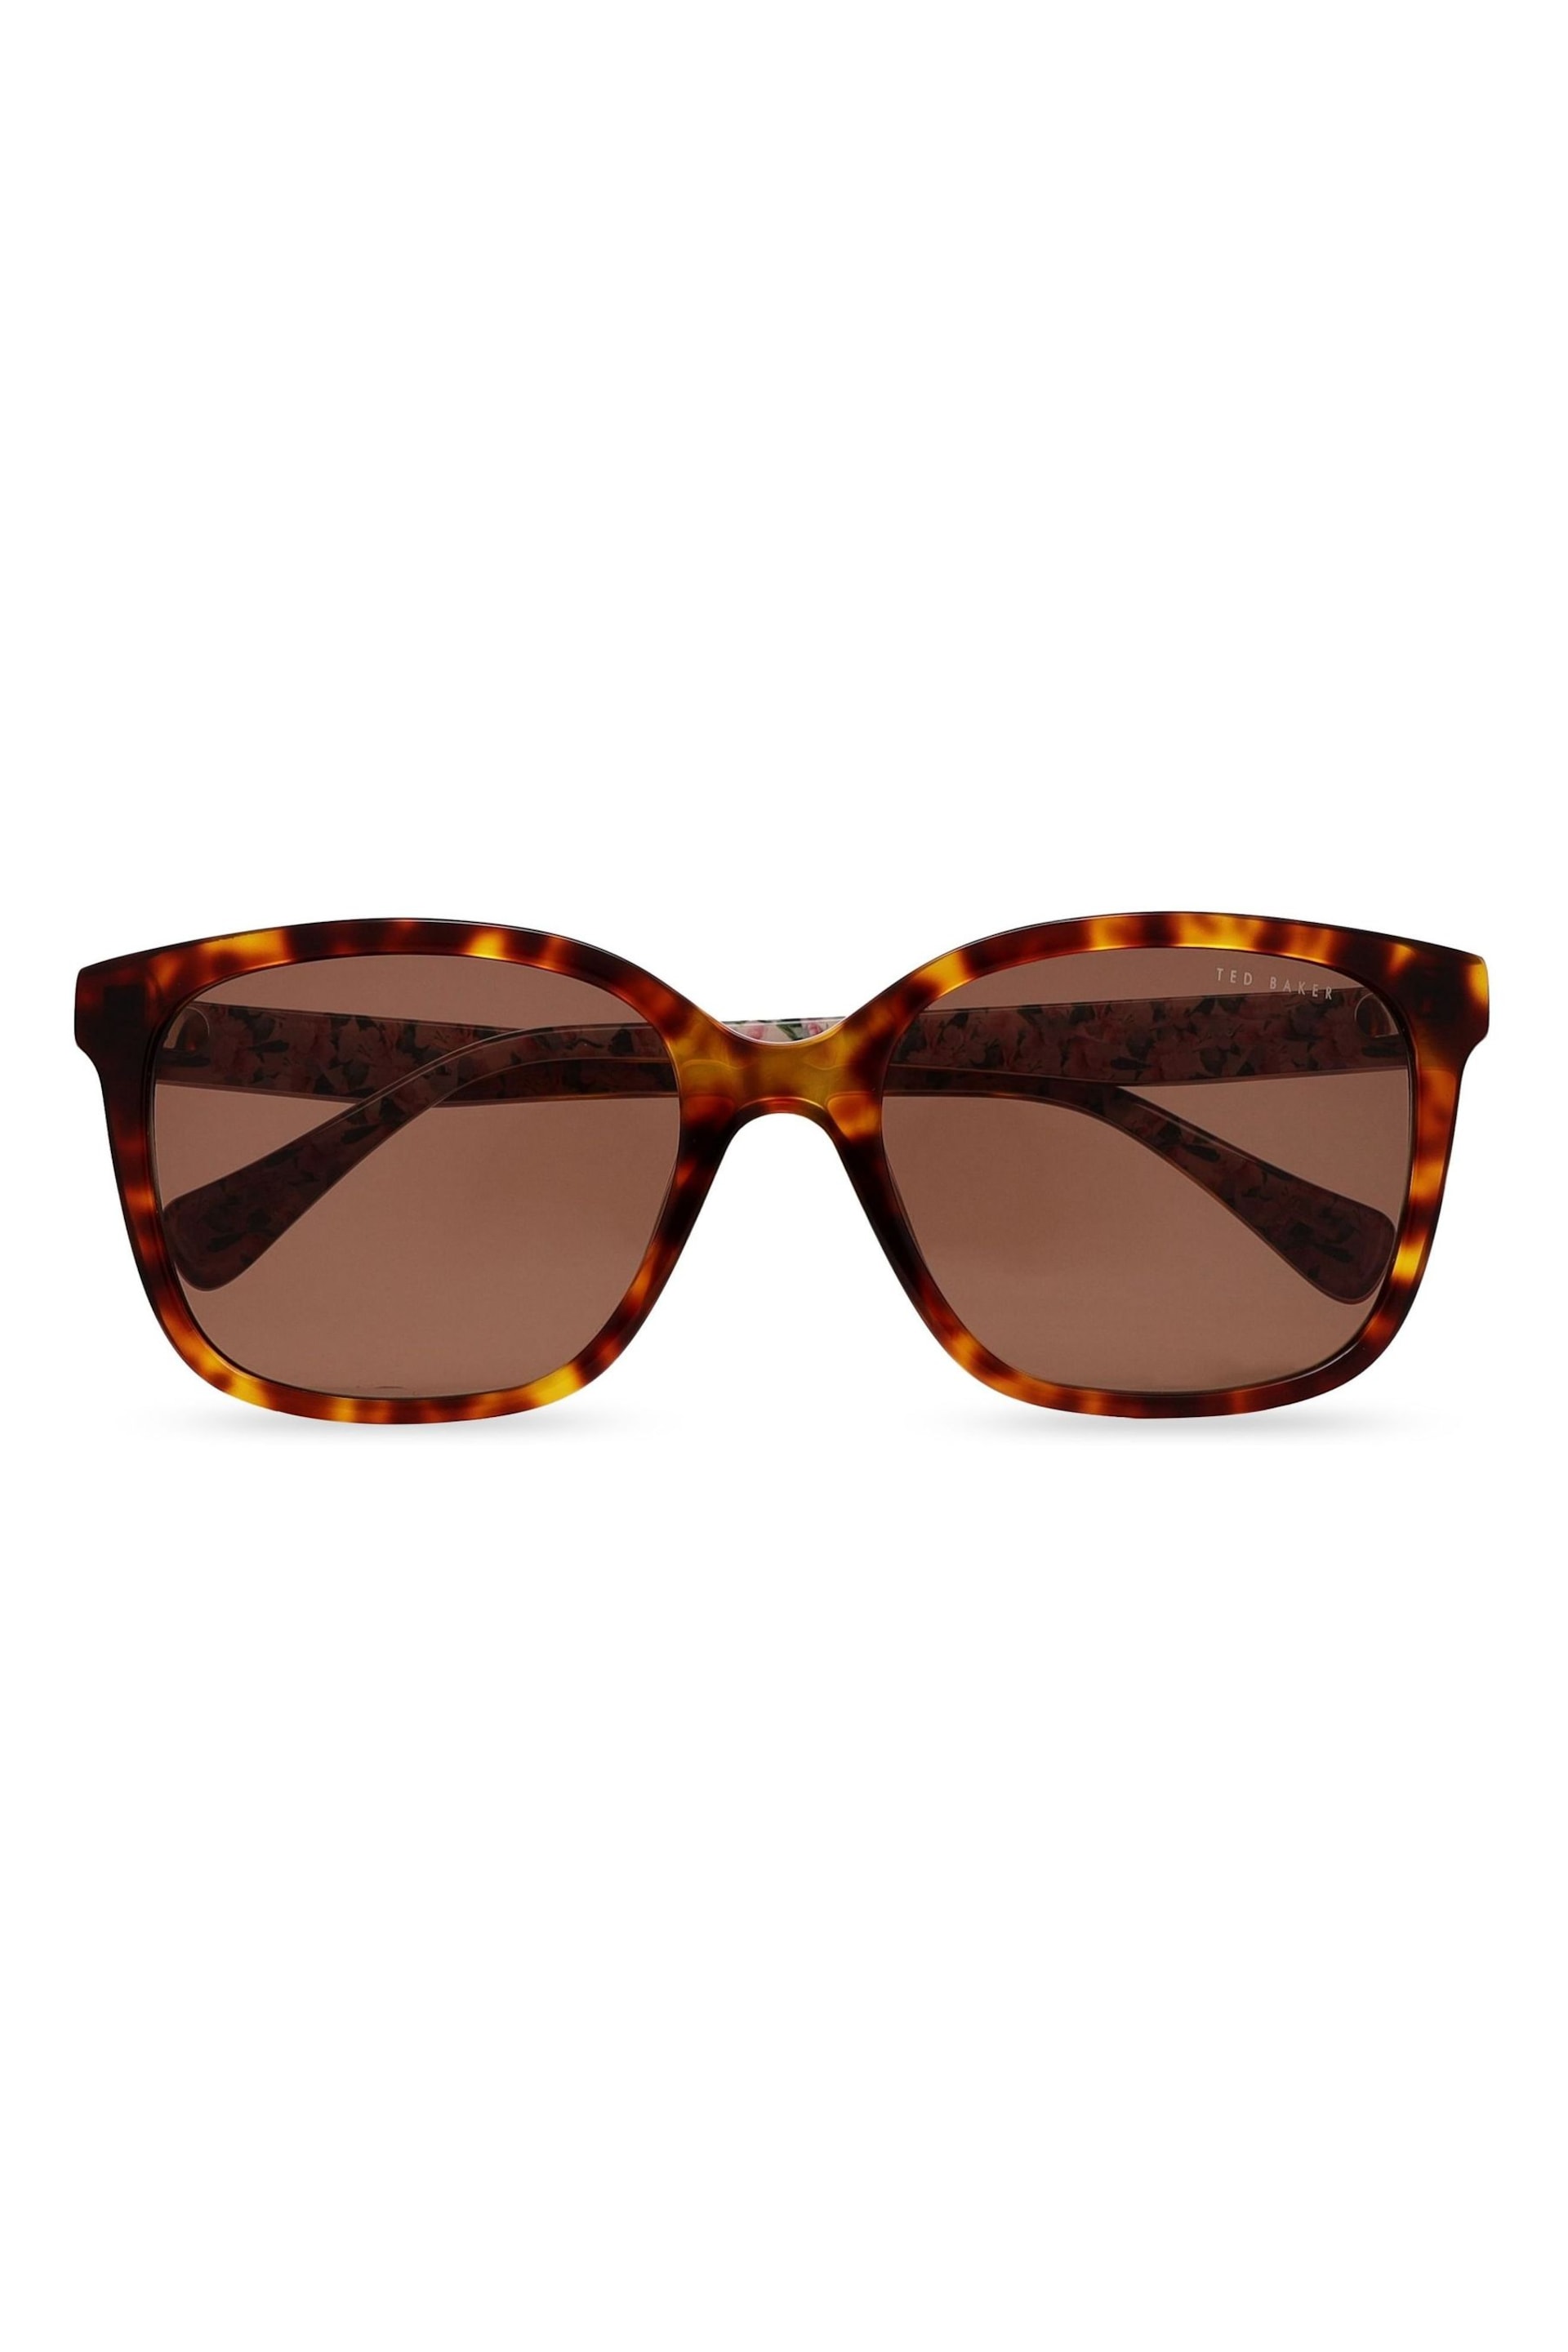 Ted Baker Brown Shaney Sunglasses - Image 2 of 5